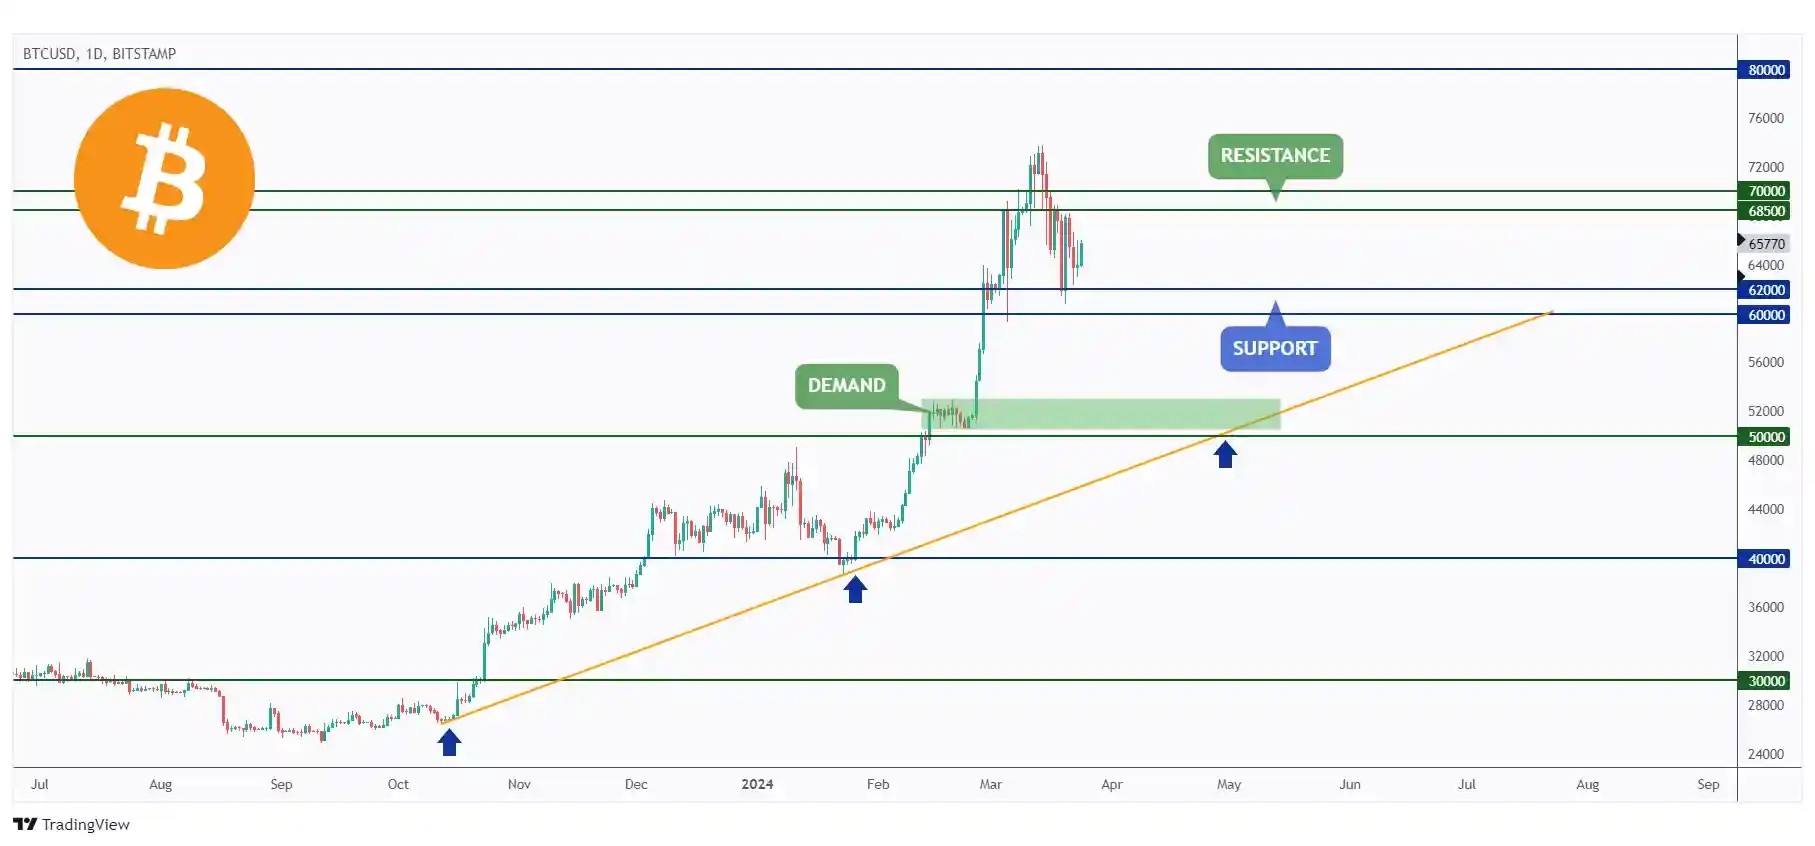 BTC daily chart hovering within a range between $60,000 support and $70,000 resistance.